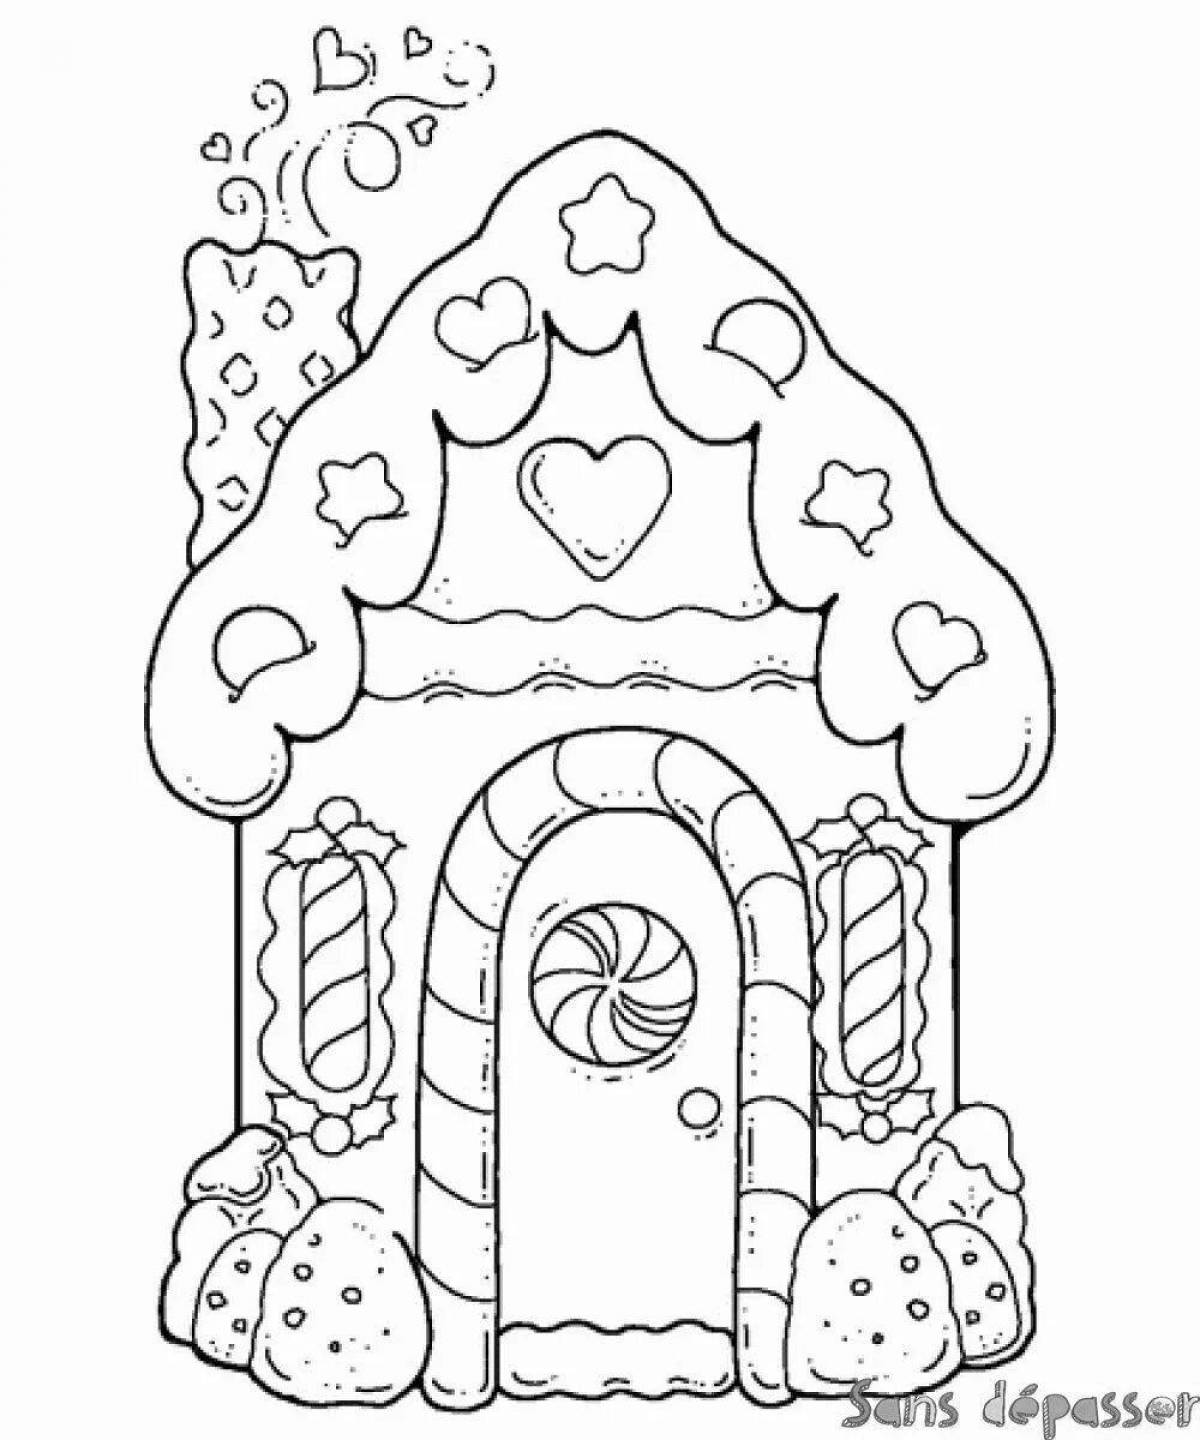 Amazing Christmas gingerbread house coloring book